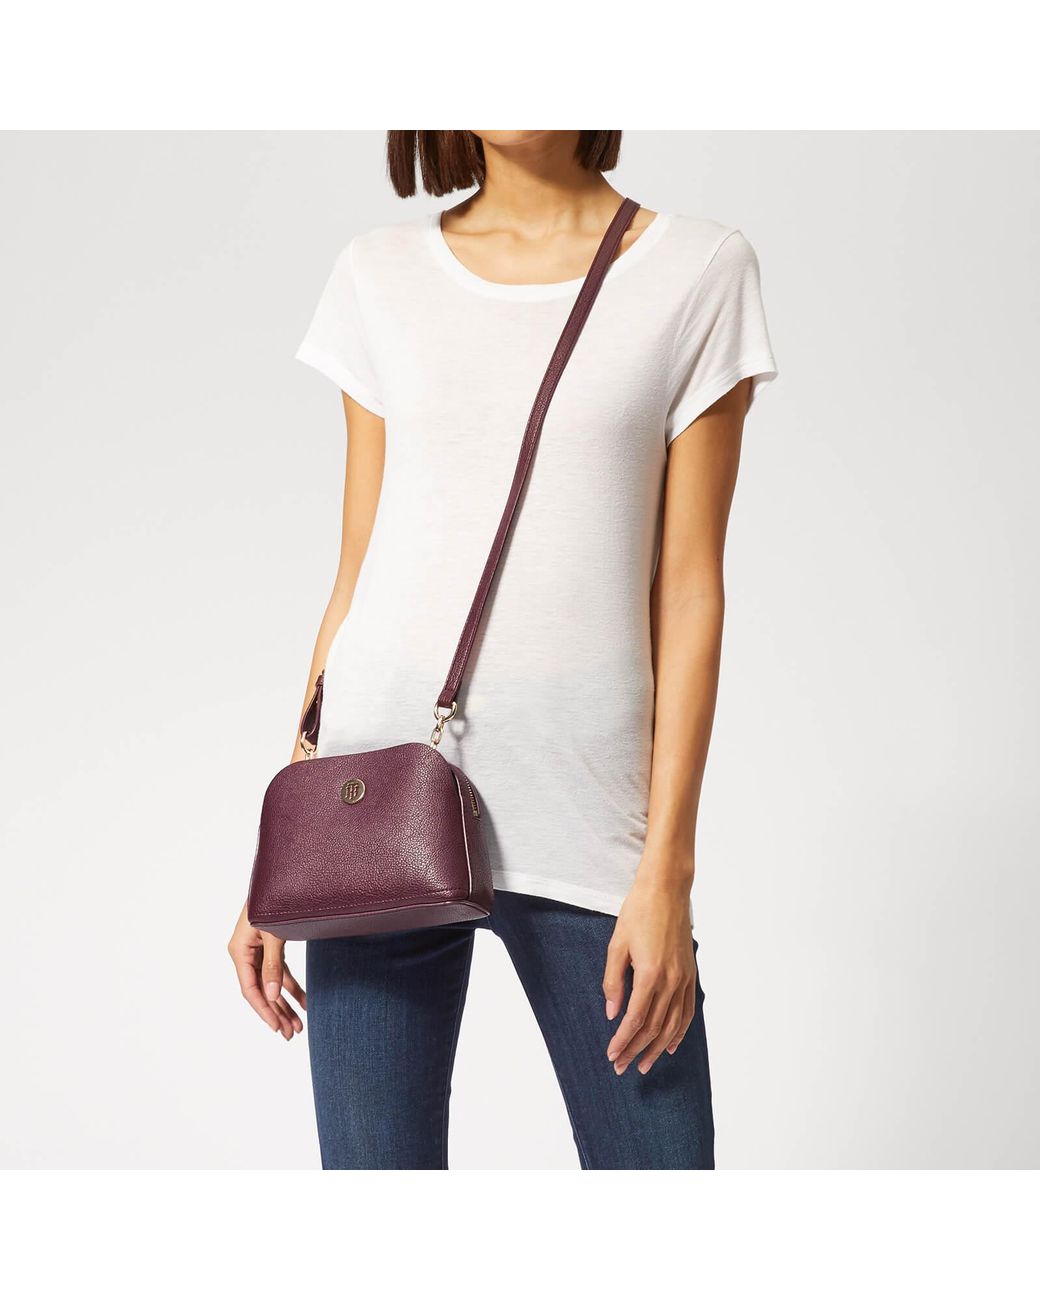 Tommy Hilfiger Core Crossover Bag in Purple | Lyst Canada